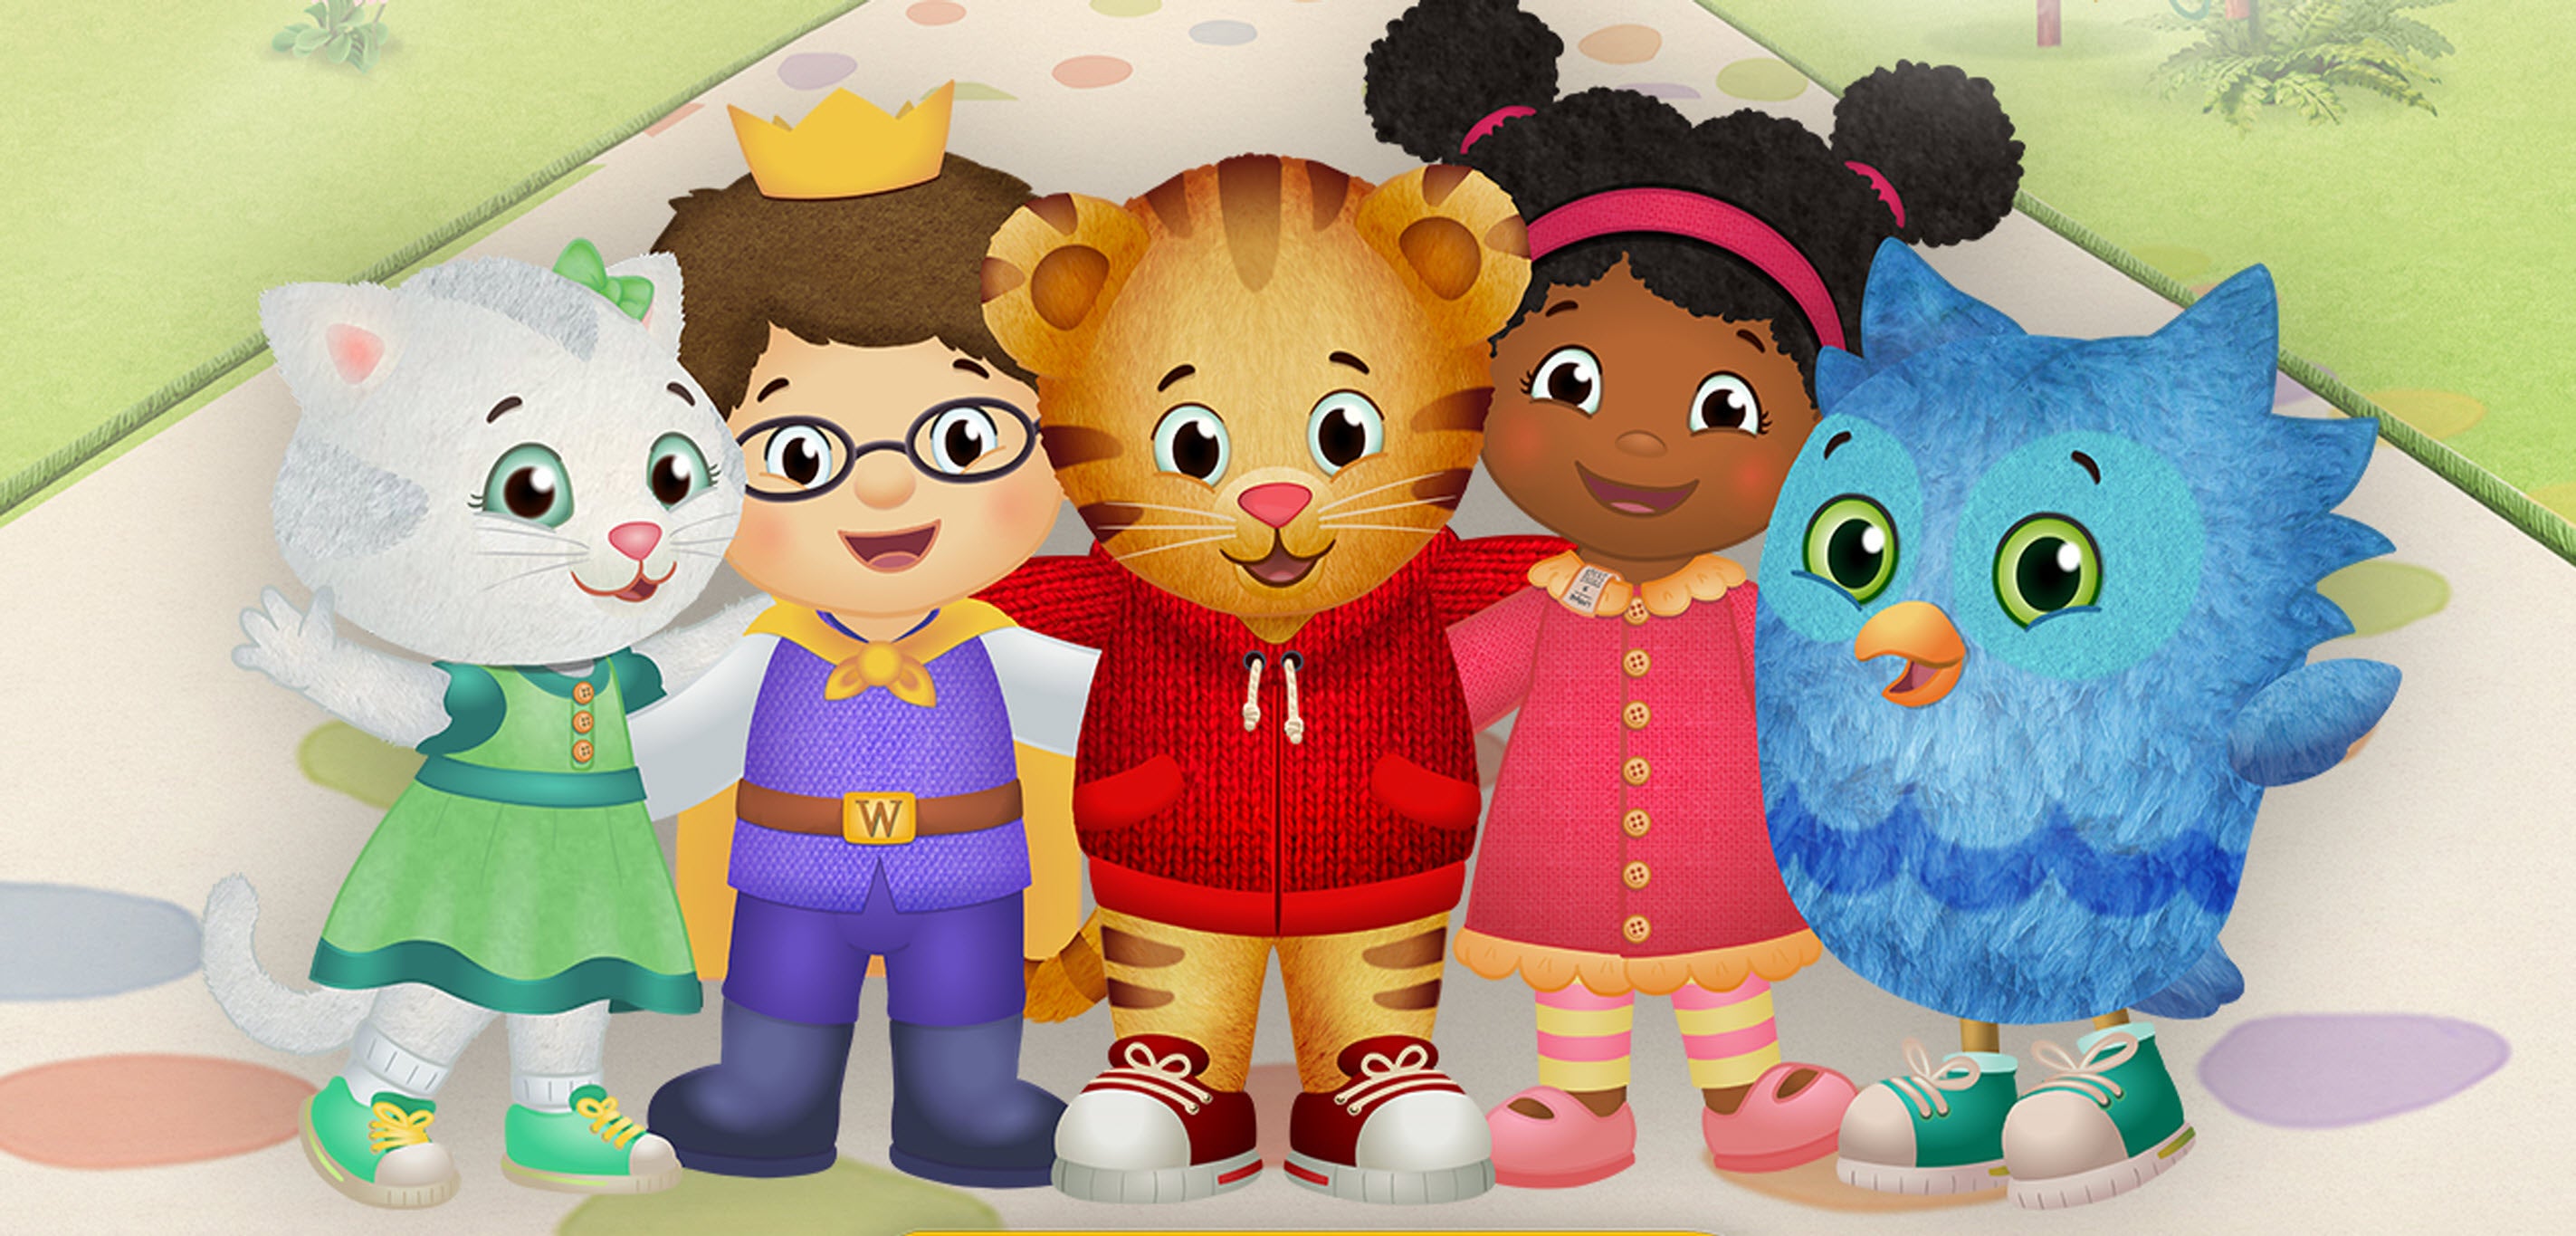 Daniel Tiger's Neighborhood Live!: King For A Day in Knoxville promo photo for Venue presale offer code